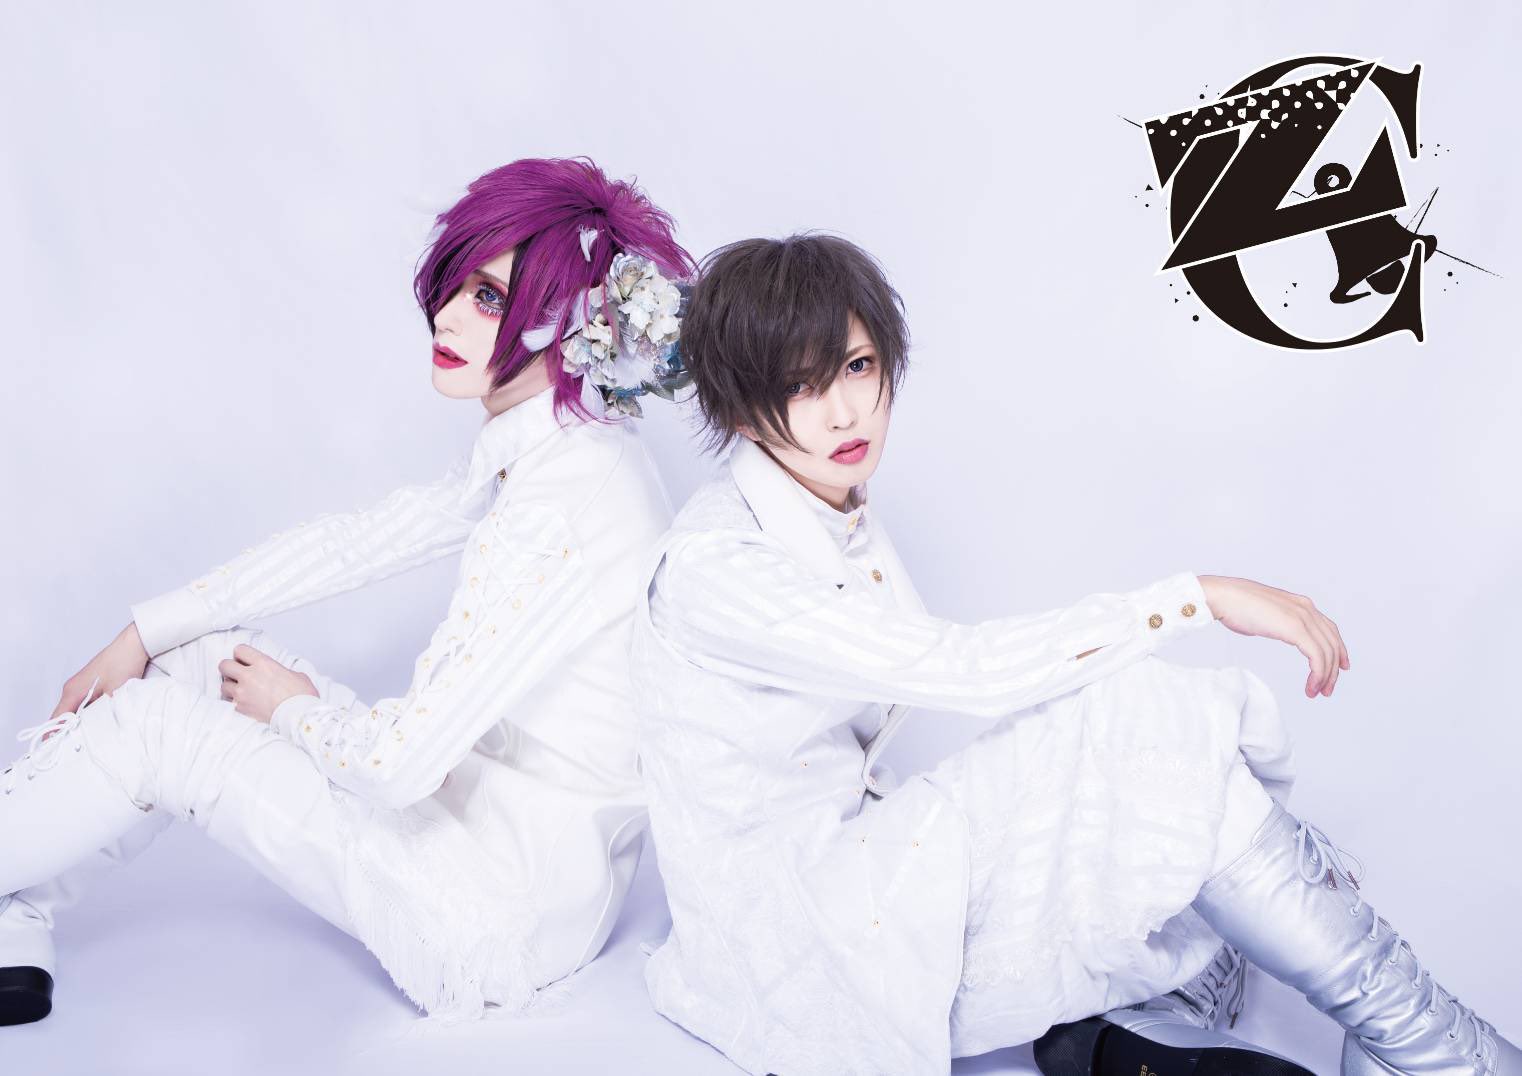 Z clear – New single “Paint”, MV spot, lyric video and new look